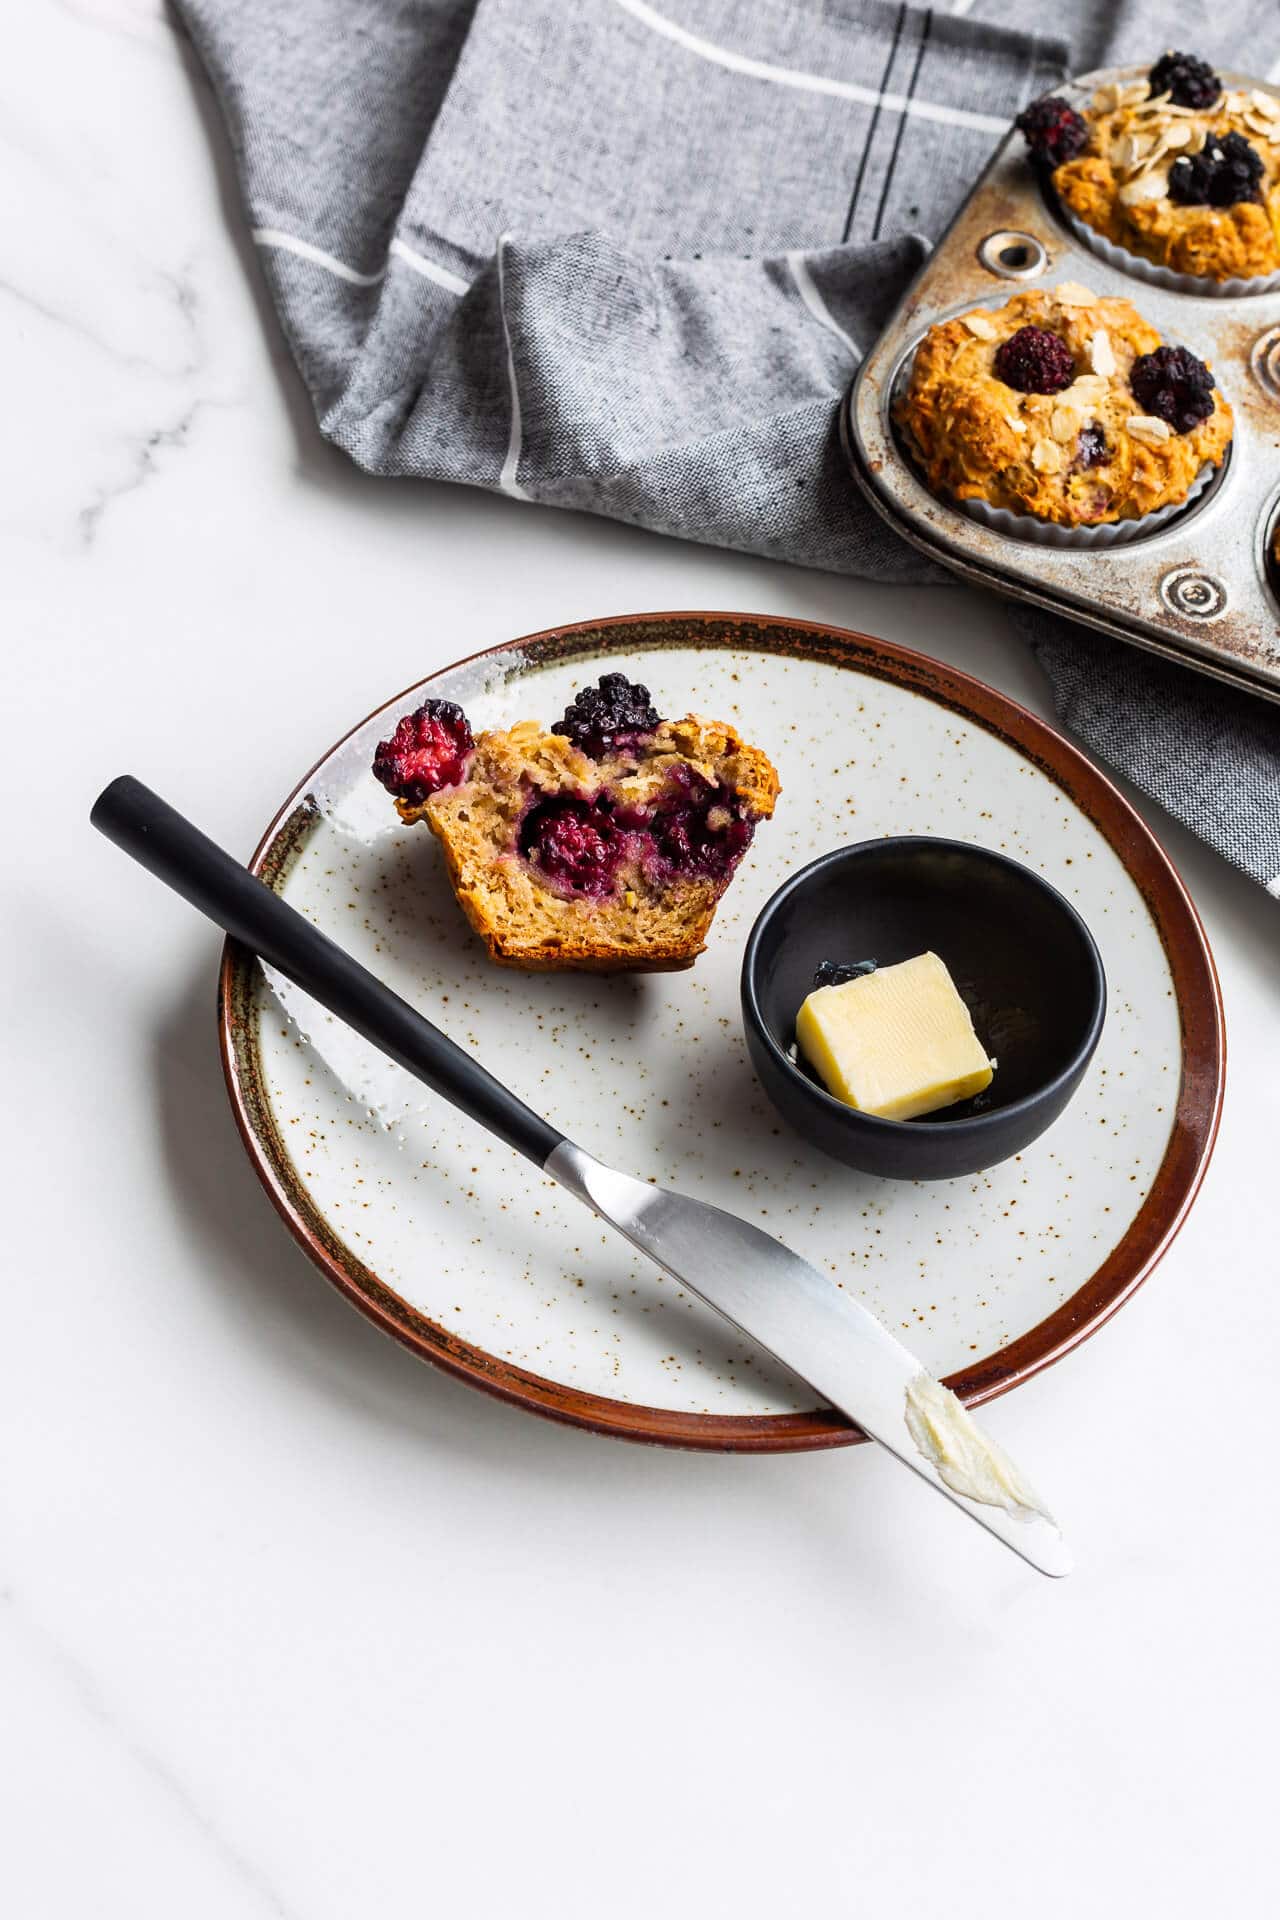 Hearty oat apple muffins with blackberries on a ceramic plate with butter and a knife, vintage muffin pan in background